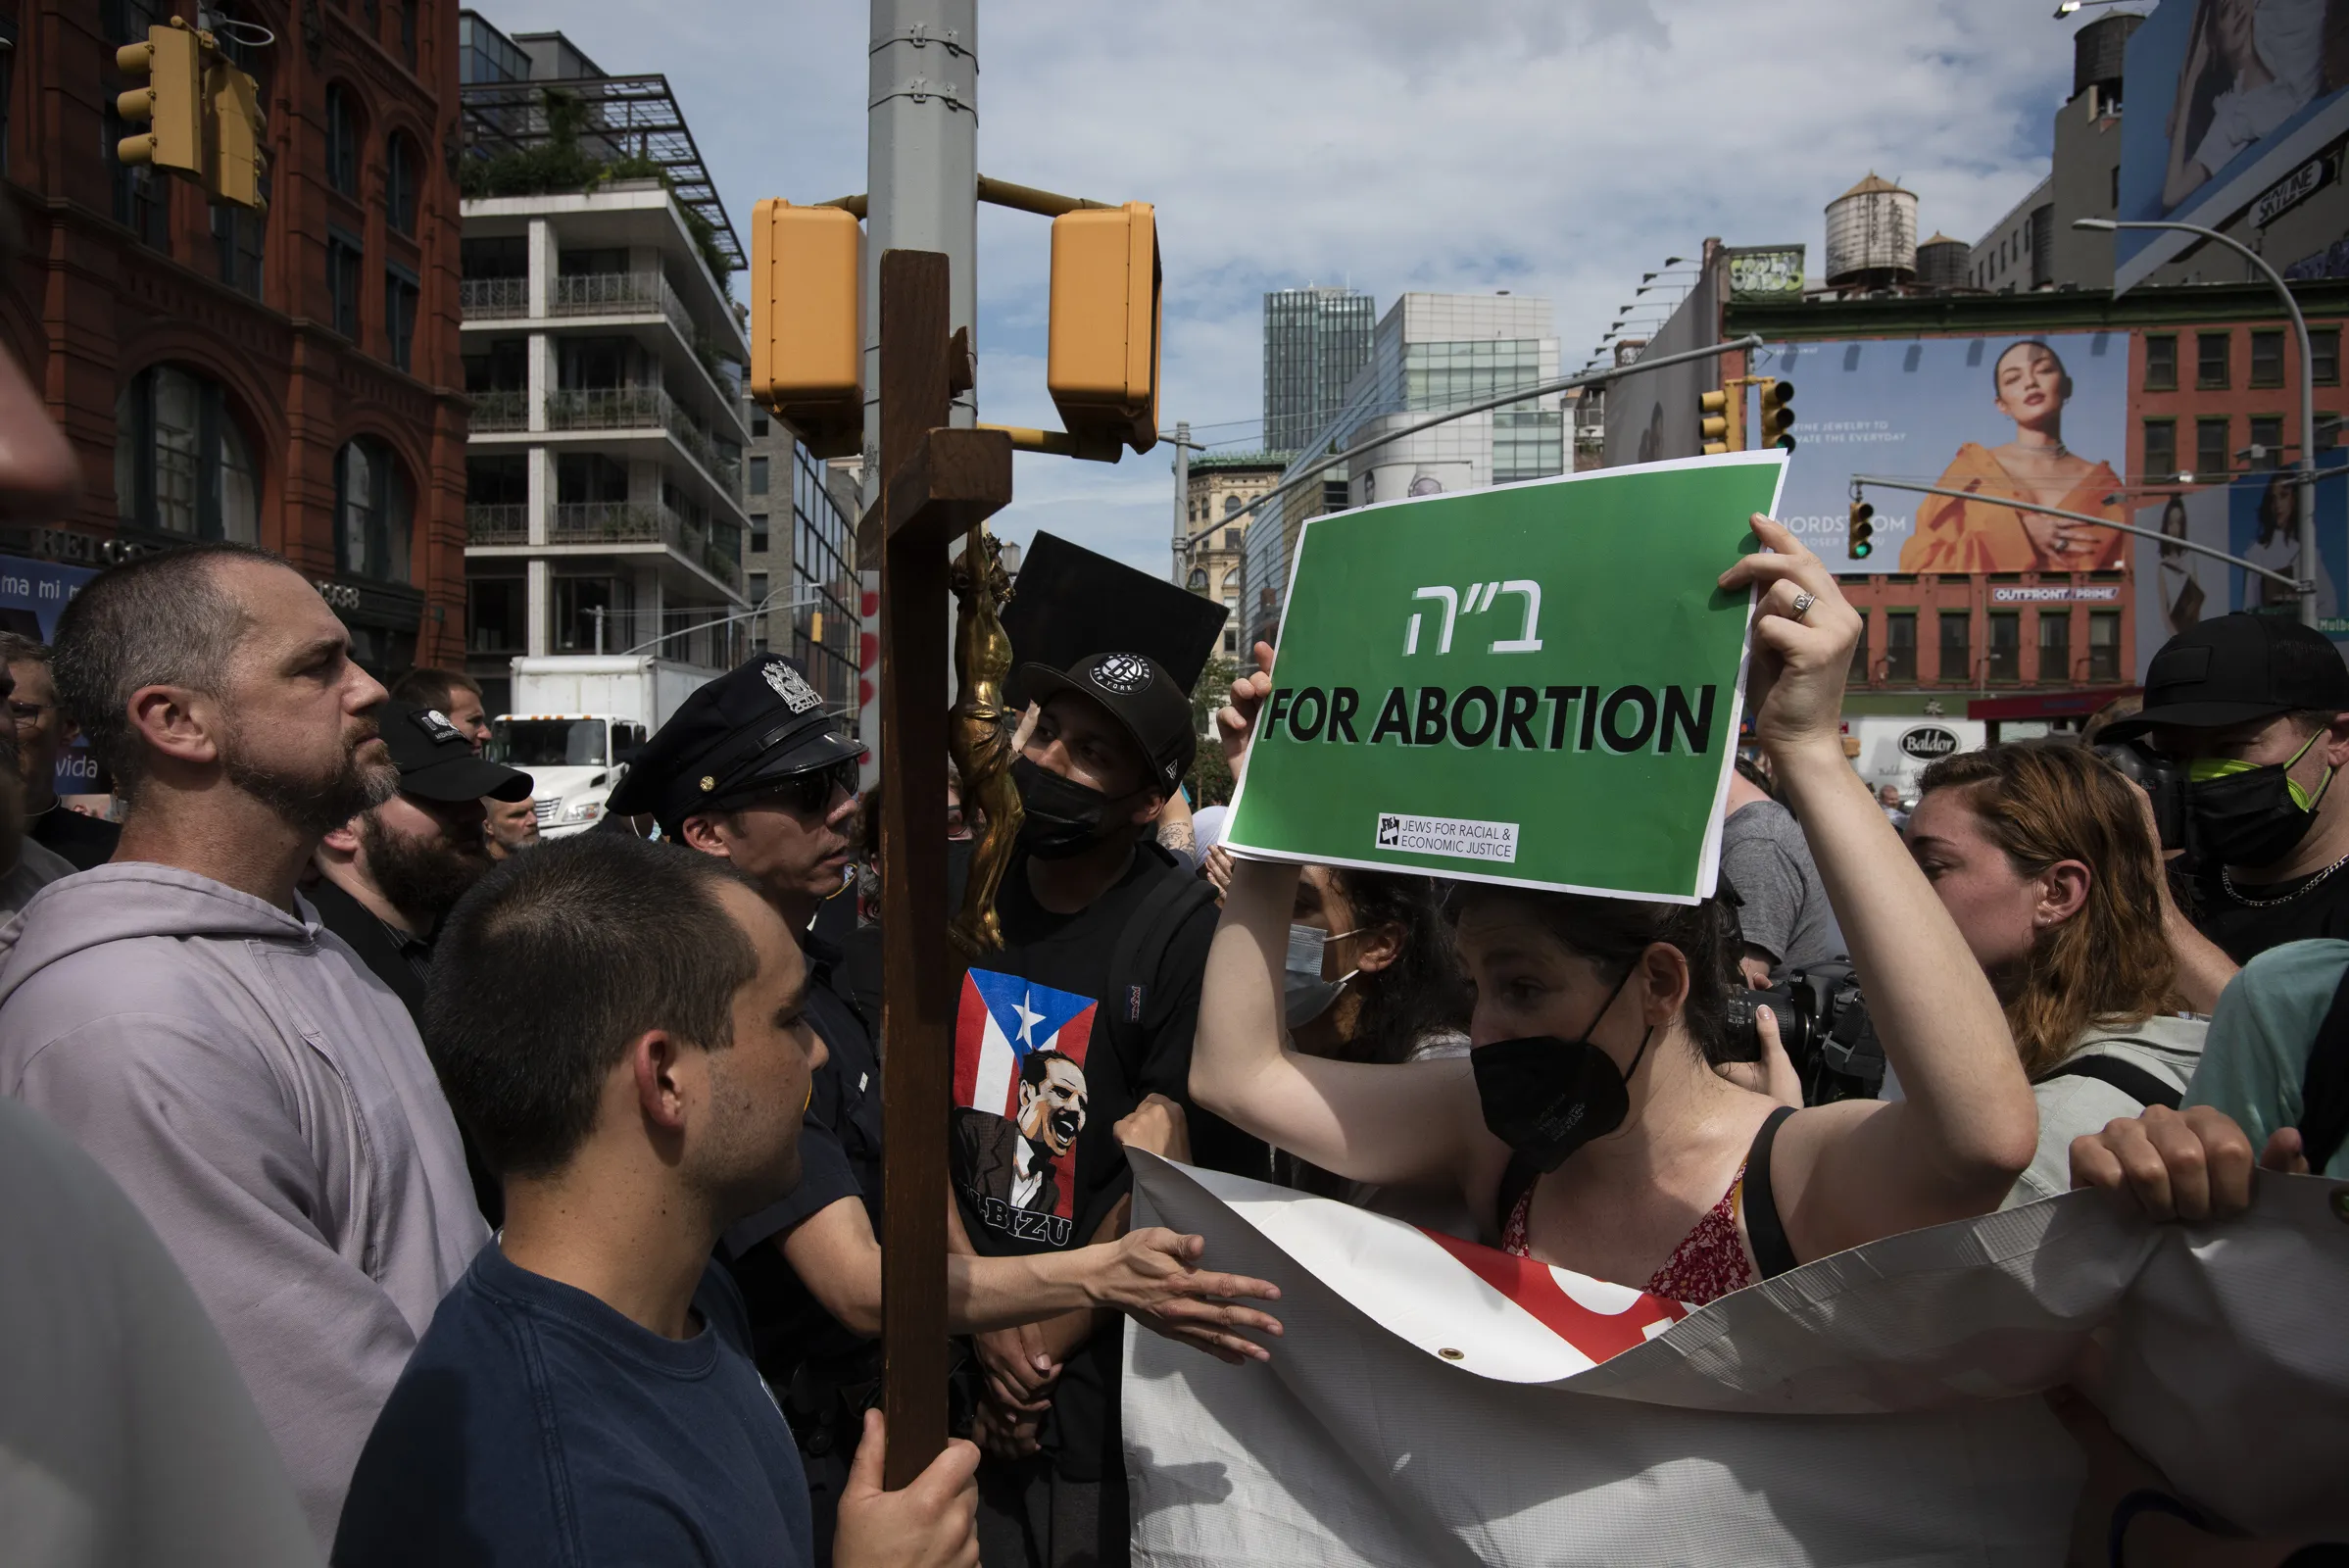 Father Fidelis Moscinski (far left, in gray robe), a well-known pro-life activist and priest of the Franciscan Friars of the Renewal (CFR) is seen during a tense standoff between pro-life and pro-abortion demonstrators in Lower Manhattan on July 2, 2022.?w=200&h=150